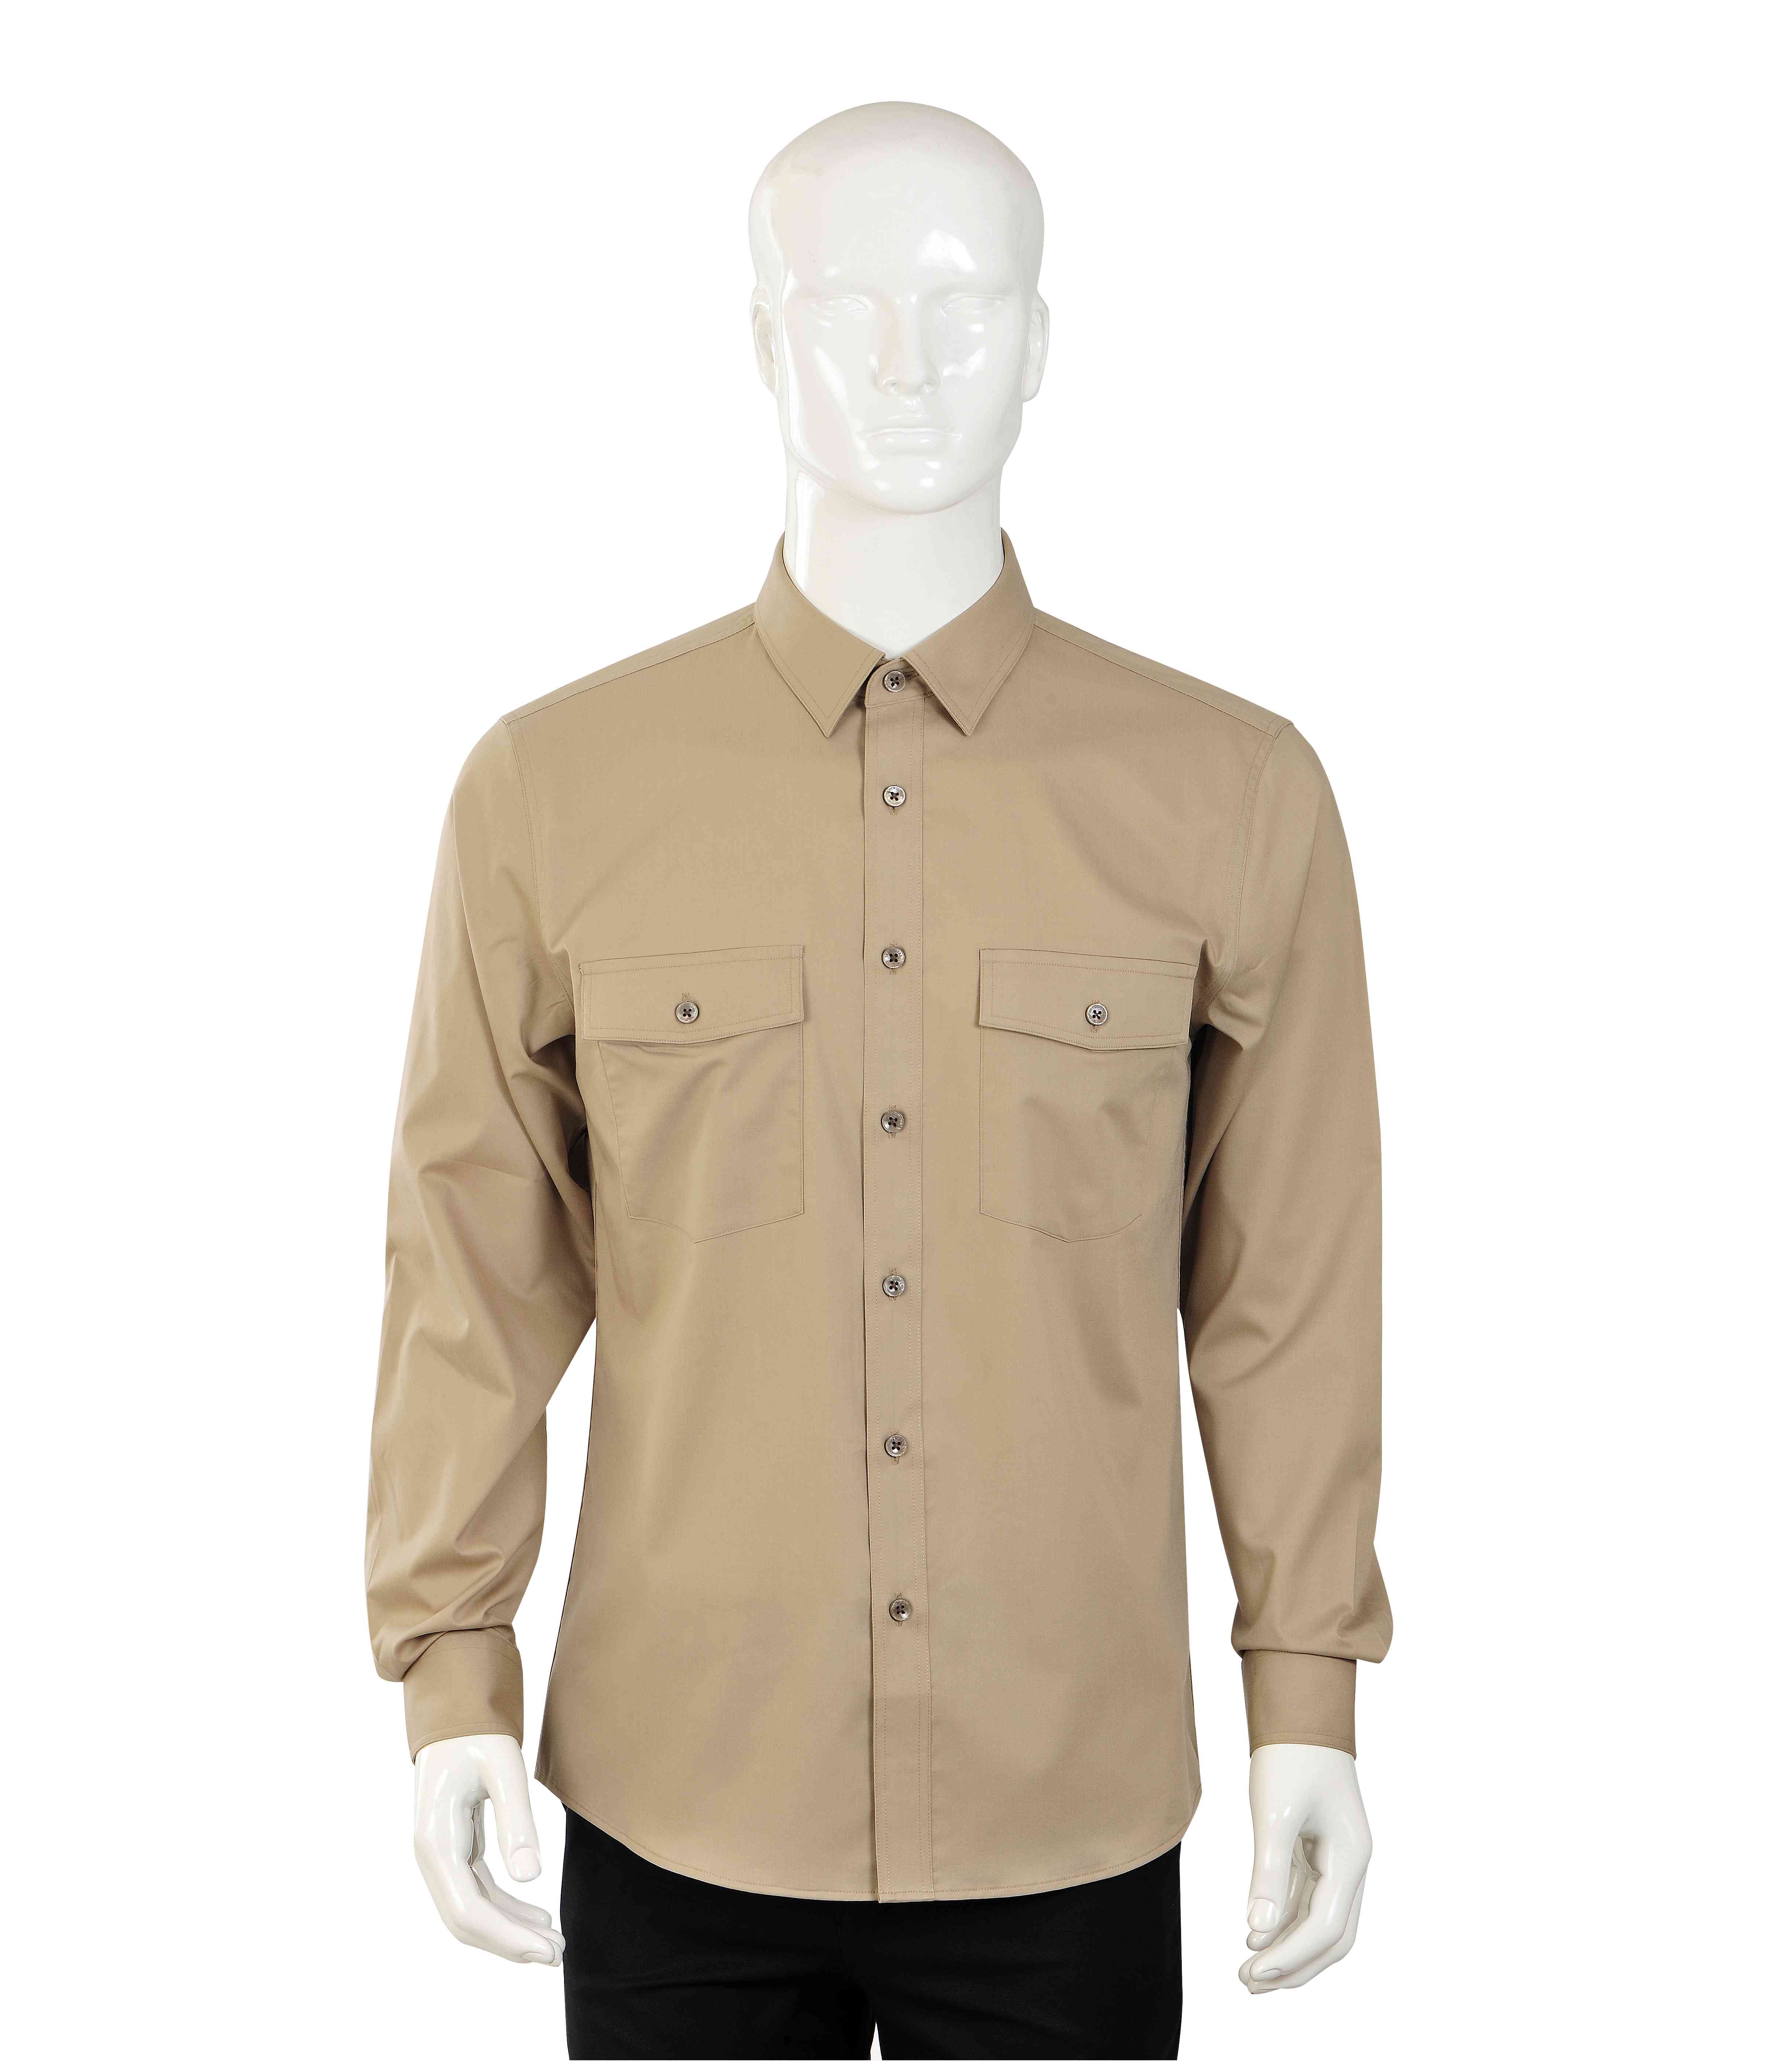 Men's double pocket with flap long sleeve casual woven shirt